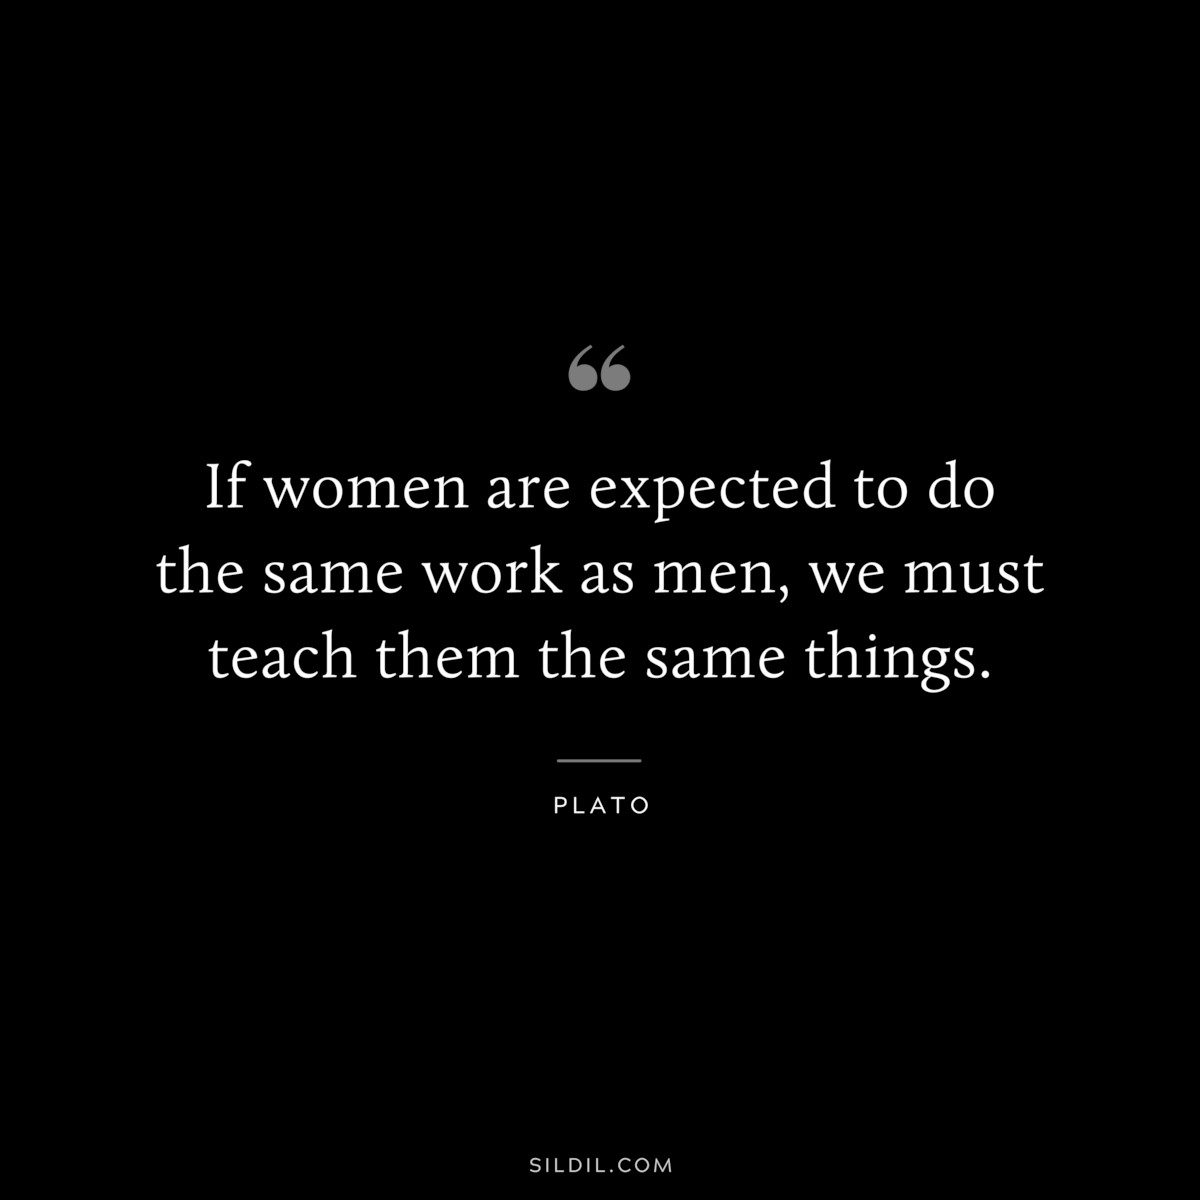 If women are expected to do the same work as men, we must teach them the same things. ― Plato